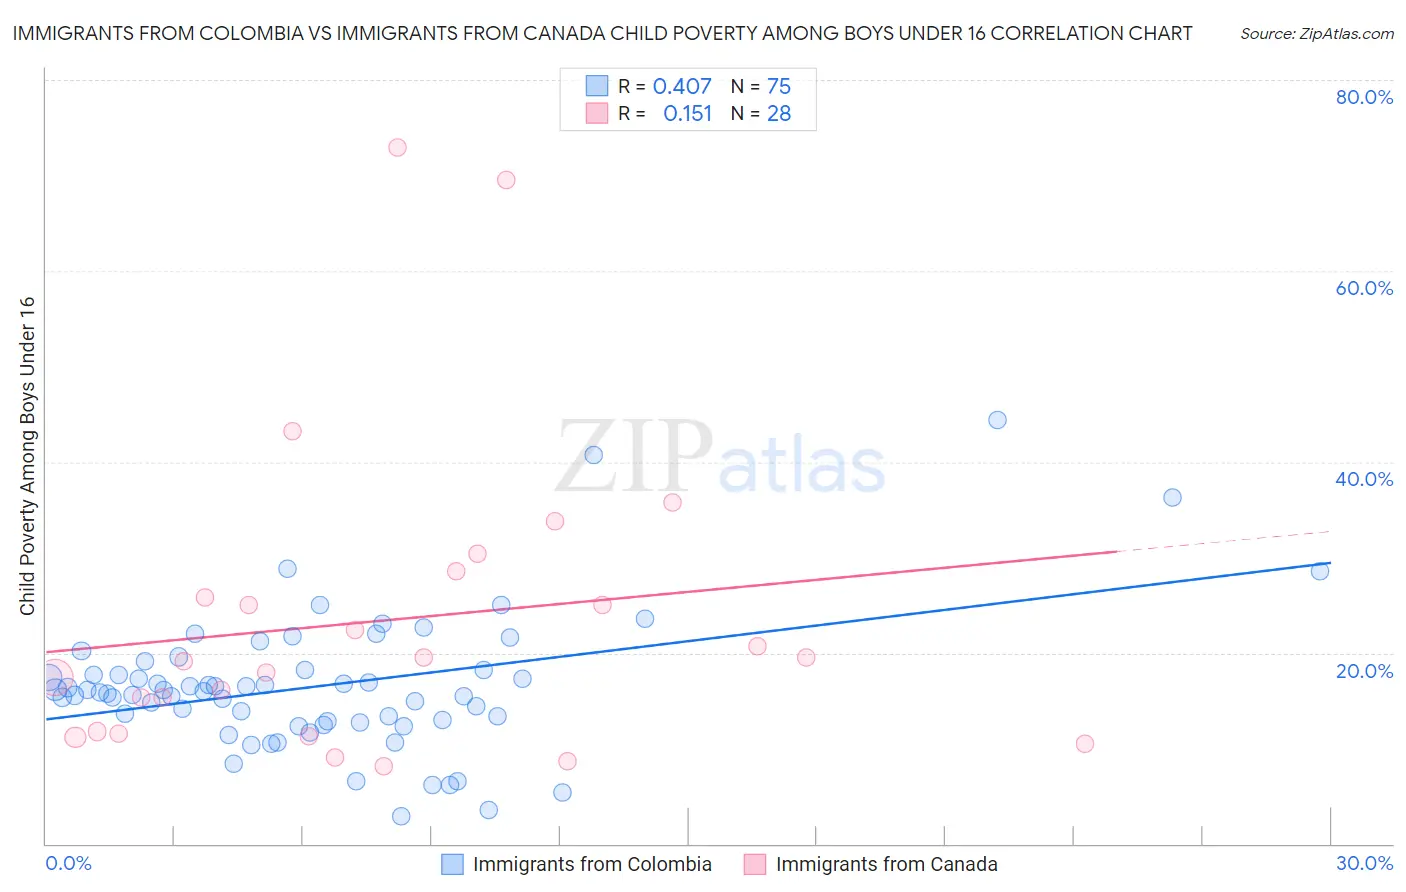 Immigrants from Colombia vs Immigrants from Canada Child Poverty Among Boys Under 16